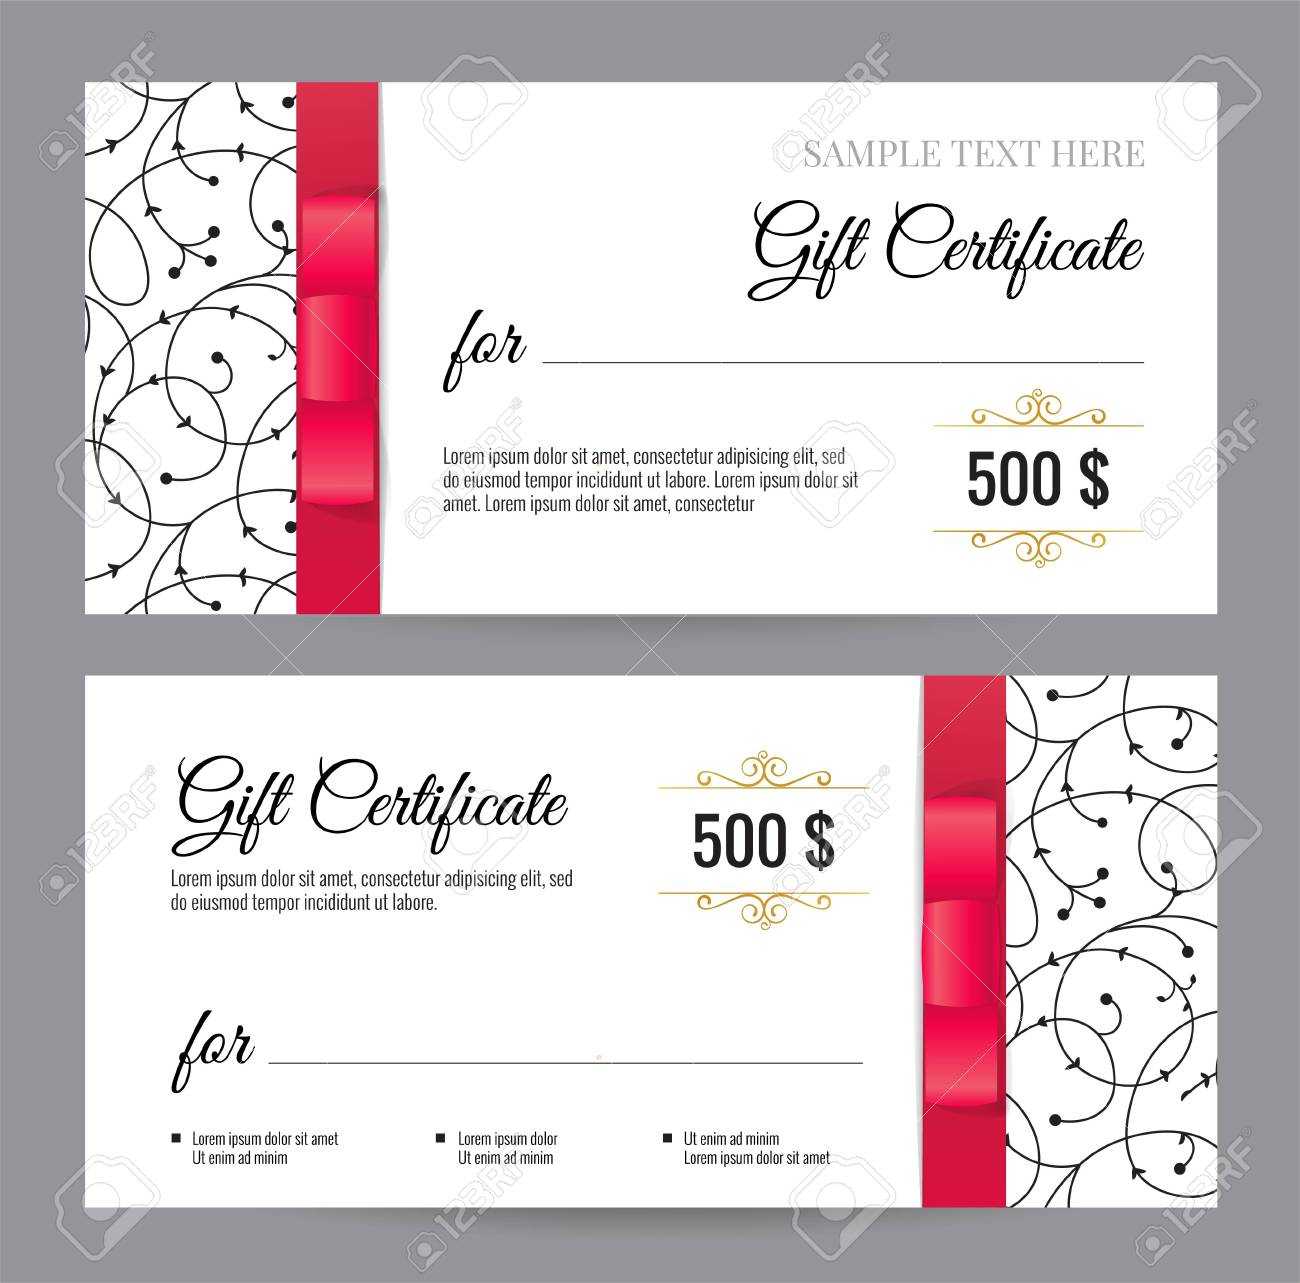 Black And White Gift Voucher Template With Floral Pattern And.. Inside Black And White Gift Certificate Template Free